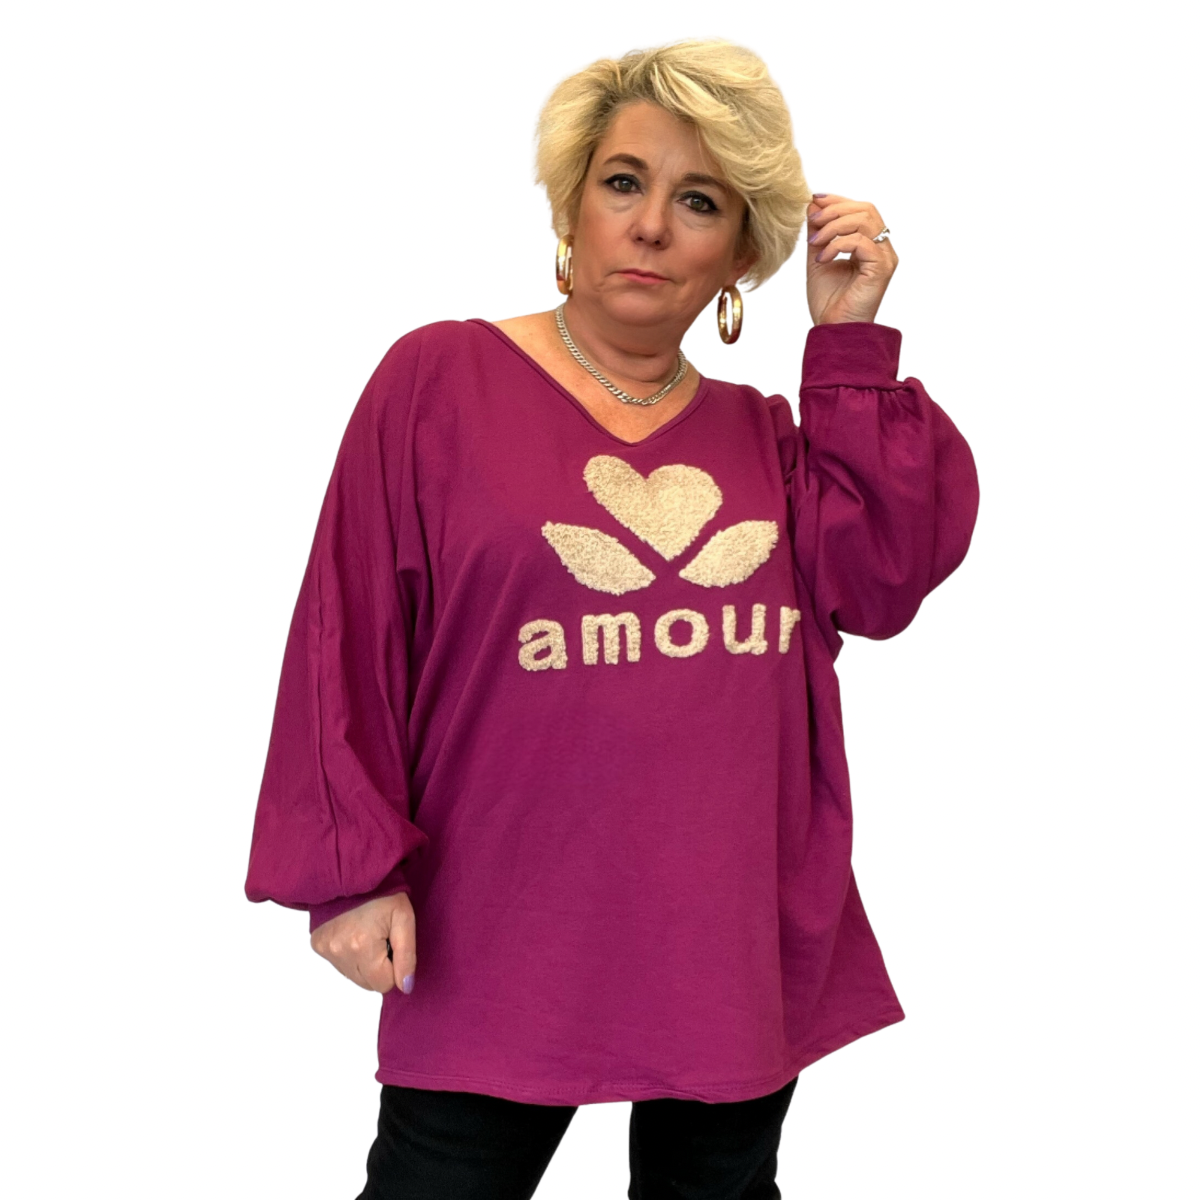 V NECK LONG SLEEVE BATWING TOP WITH FLUFFY AMOUR LOGO